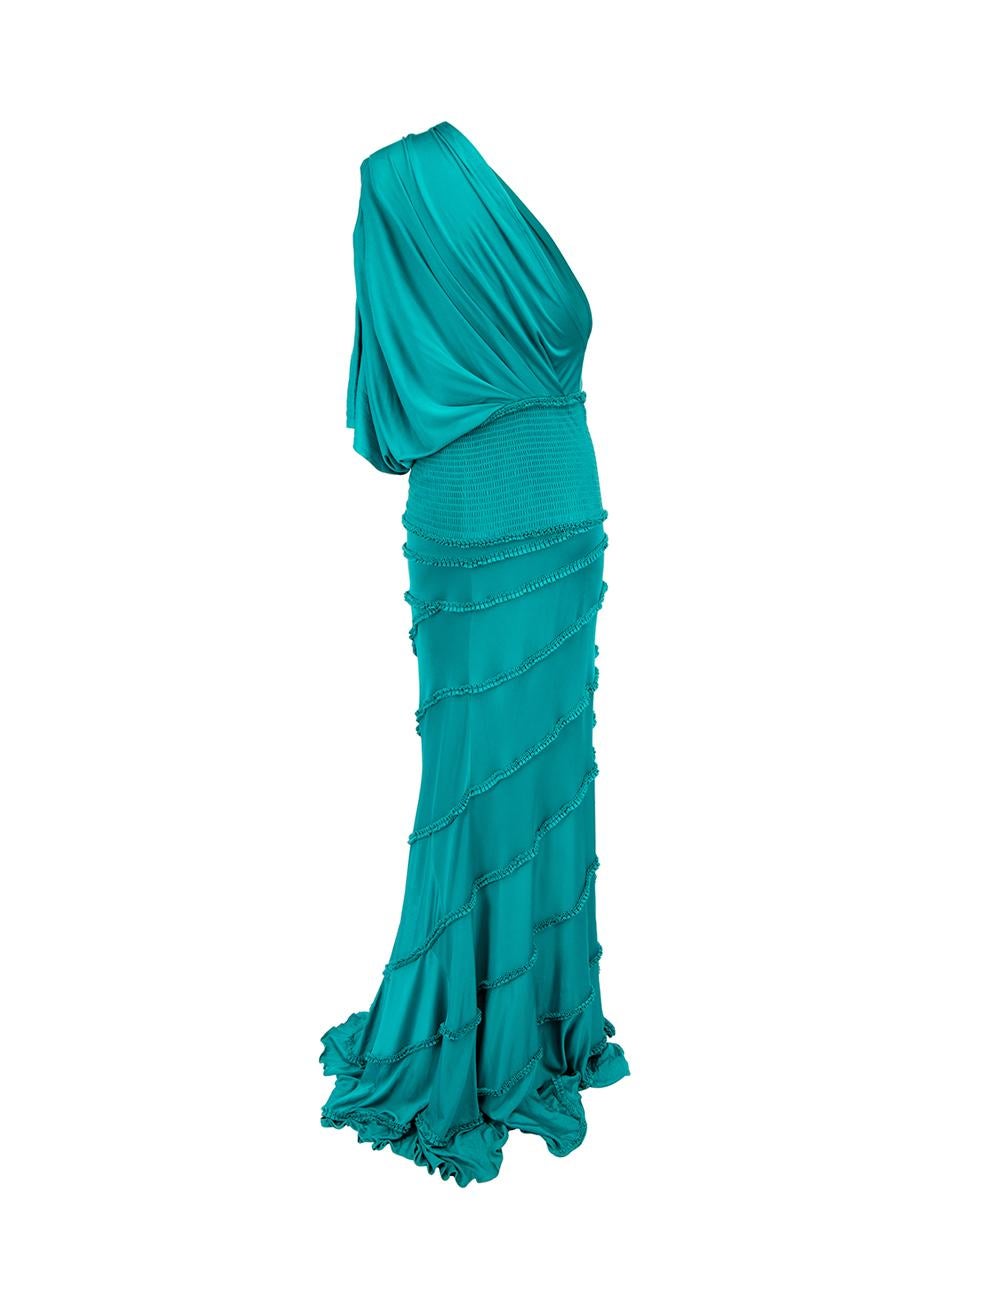 Women's Turquoise One Shoulder Ruffle Detail Maxi Dress Size M For Sale